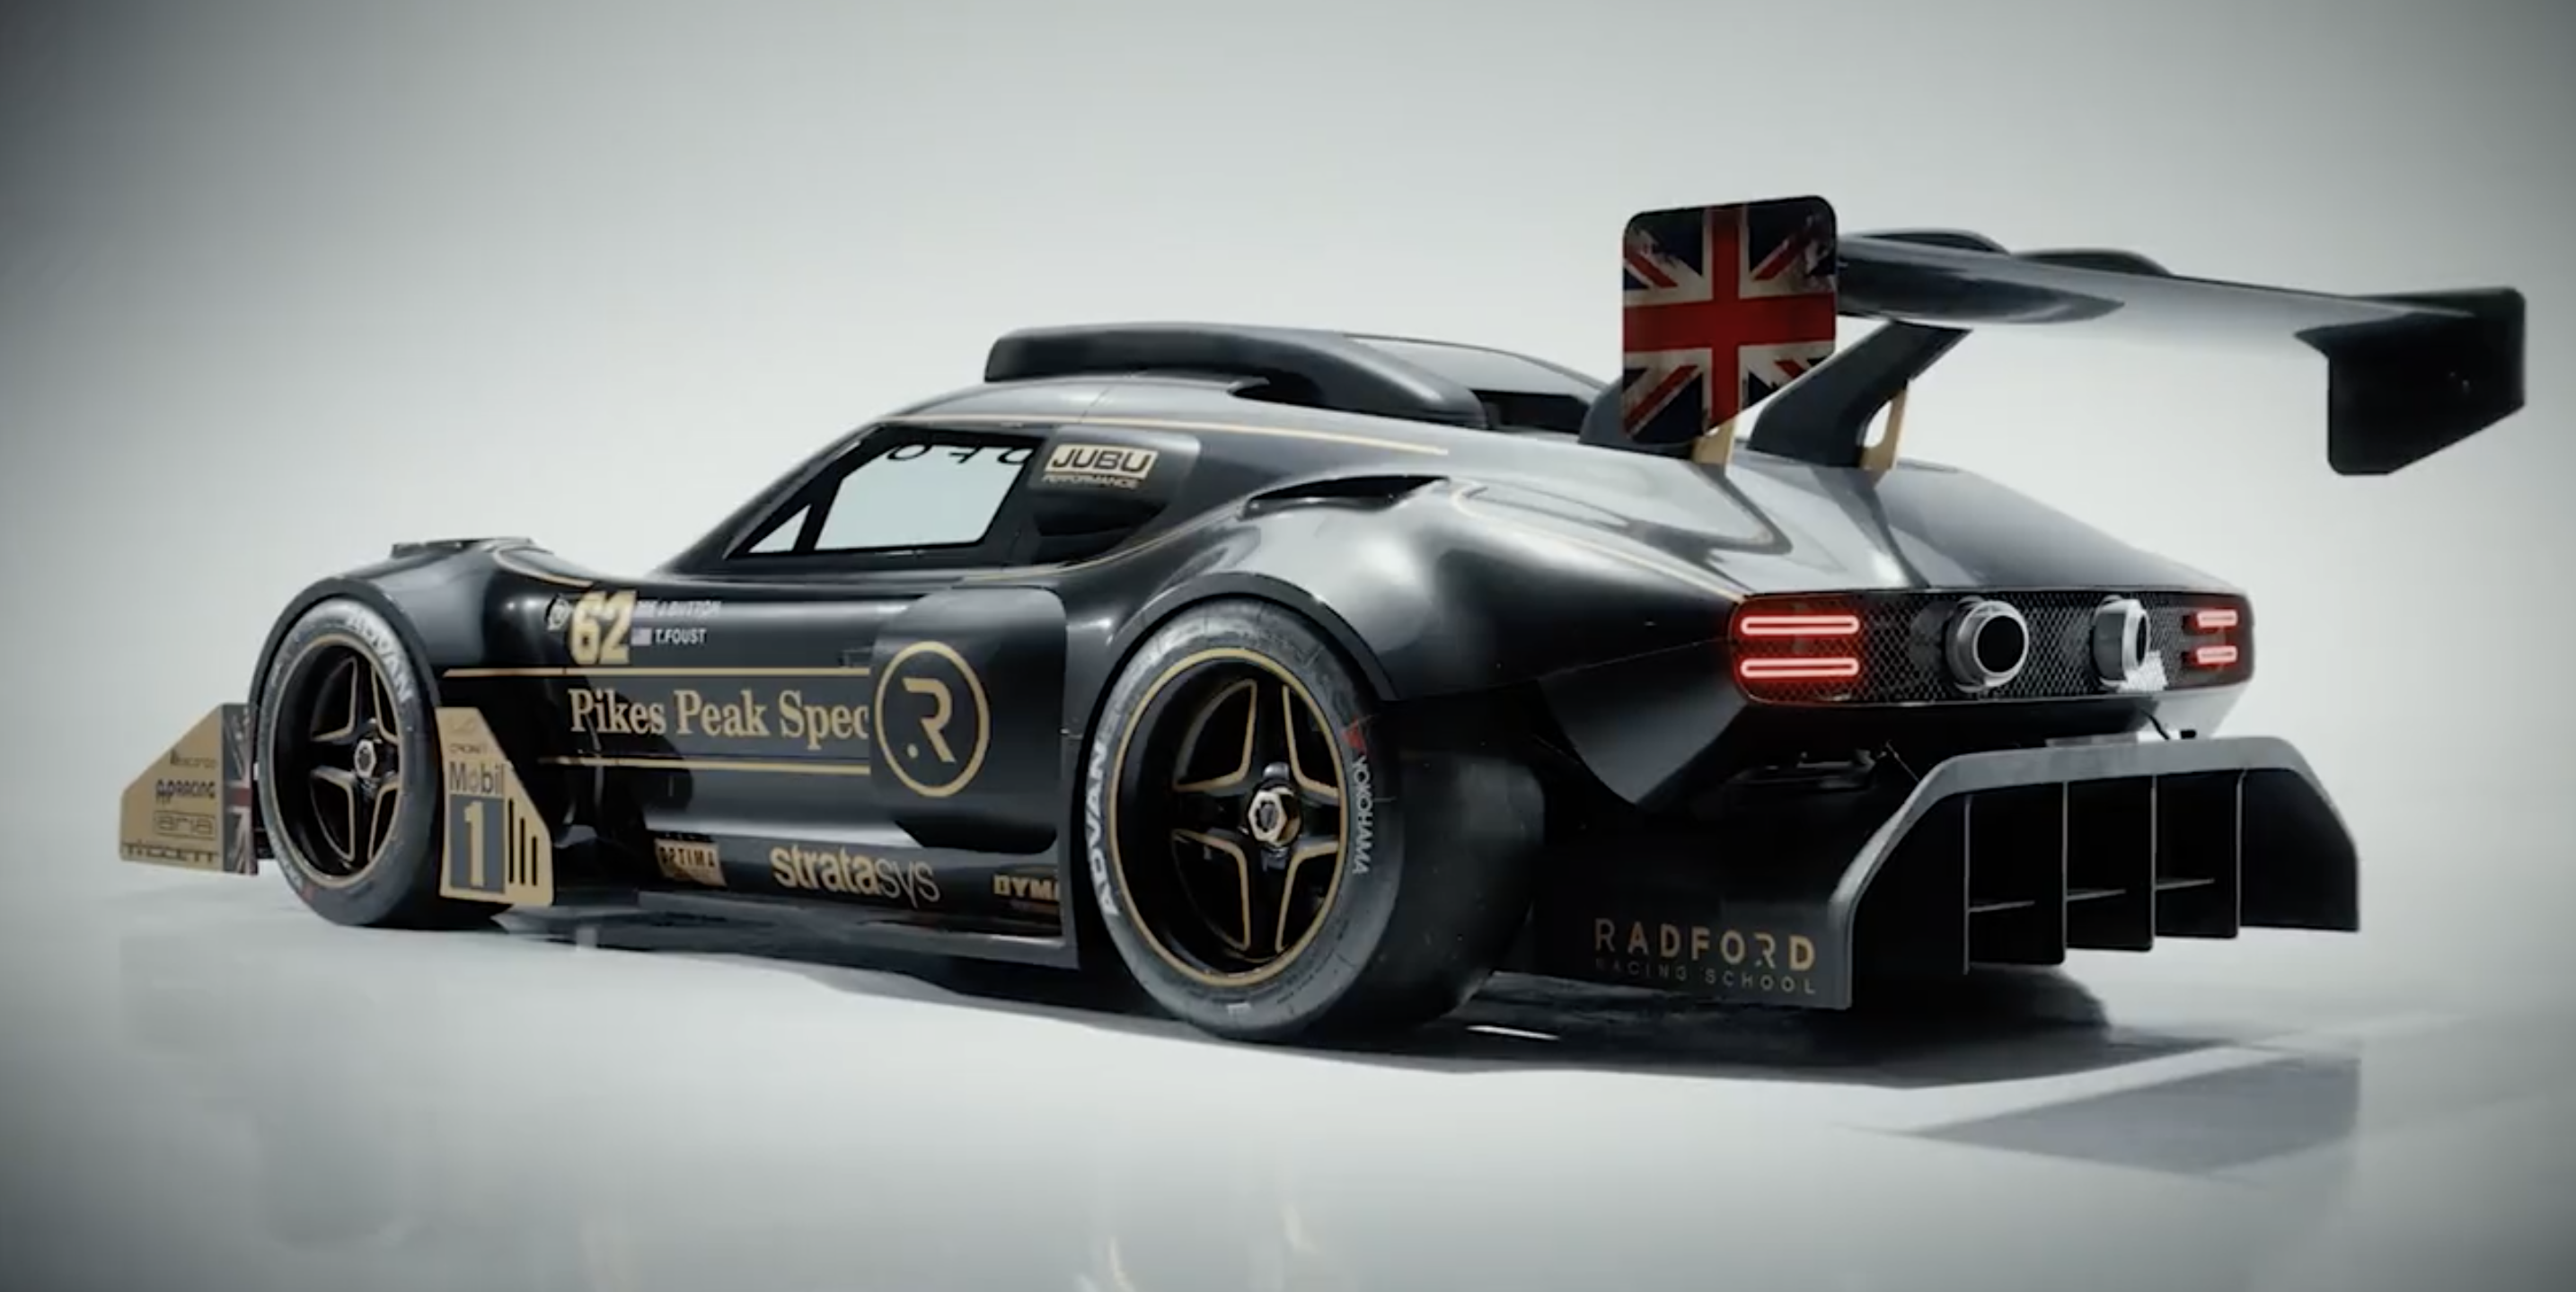 Jenson Button's Car Company Is Headed to Pikes Peak